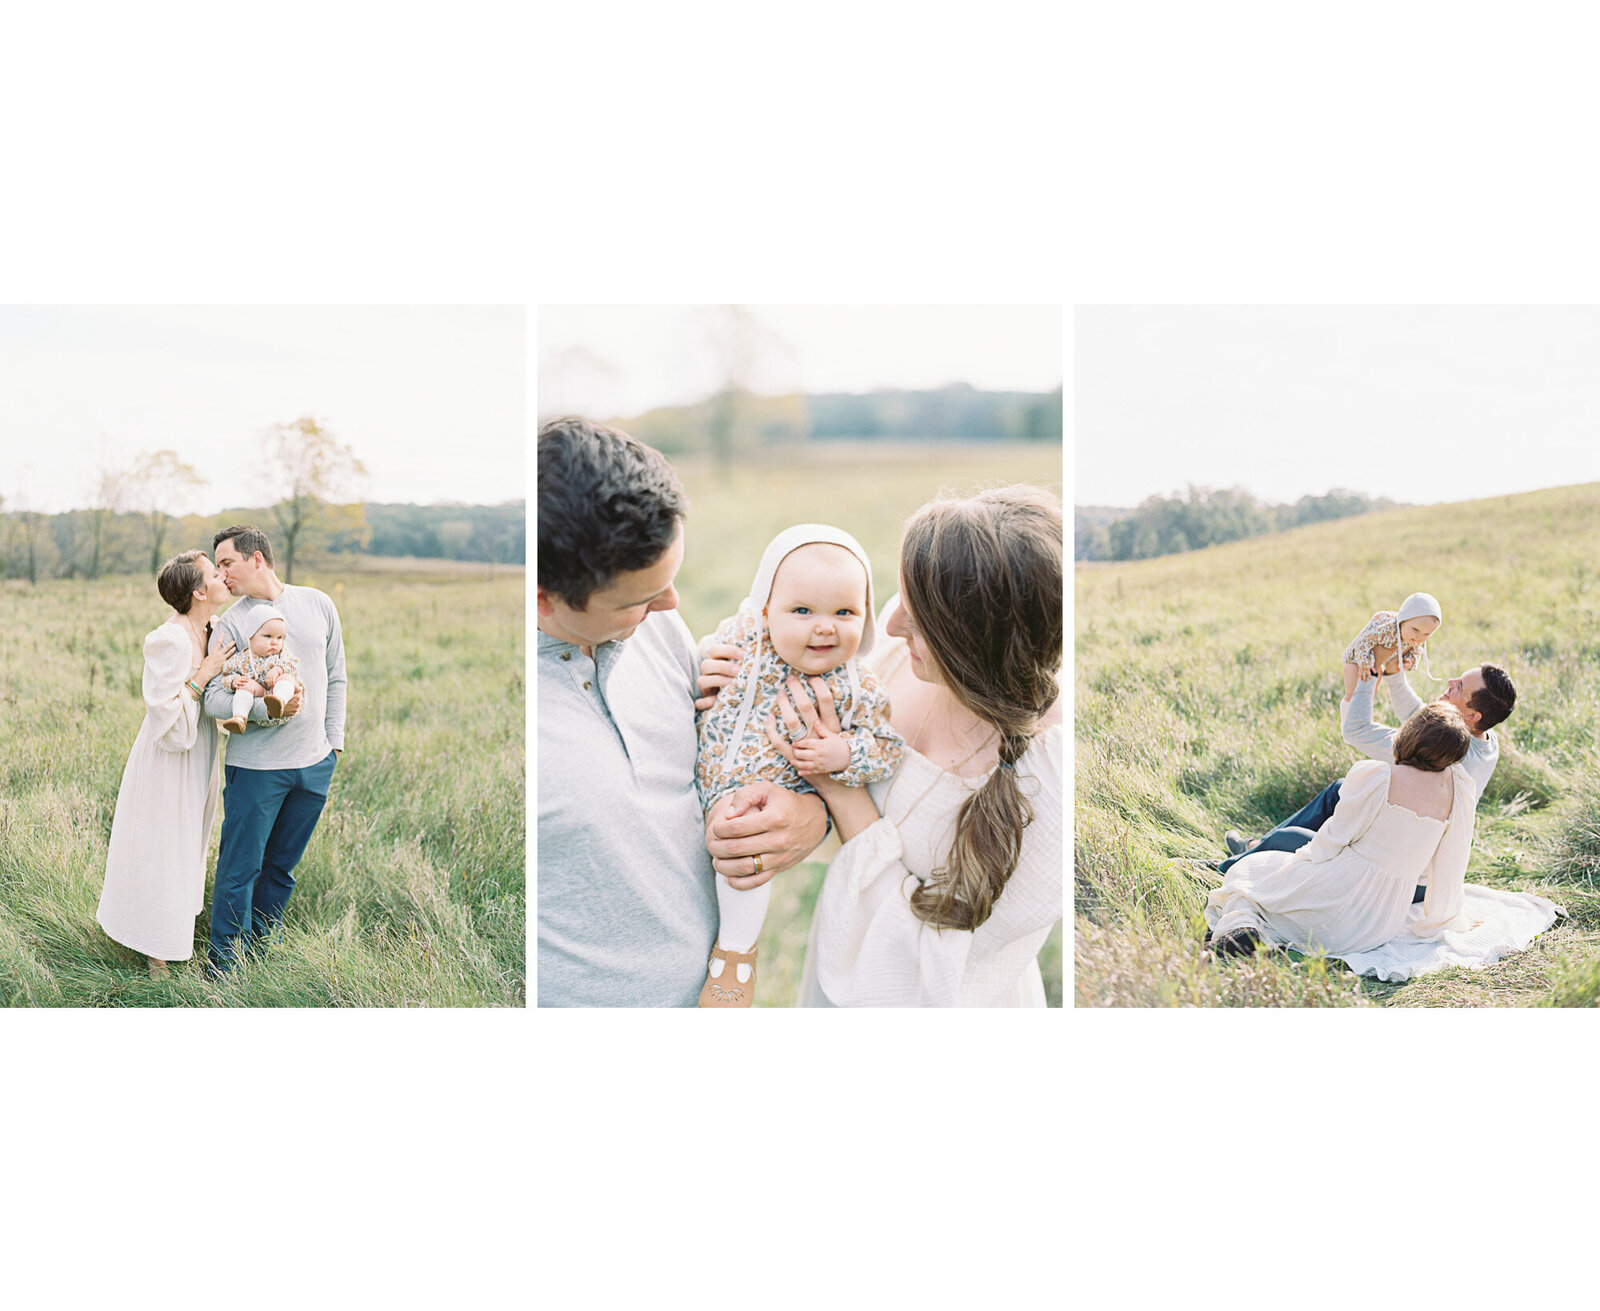 photo of a family with 9 month old baby in an idyllic outdoor field in fall by madison wi photographer, Talia Laird Photography